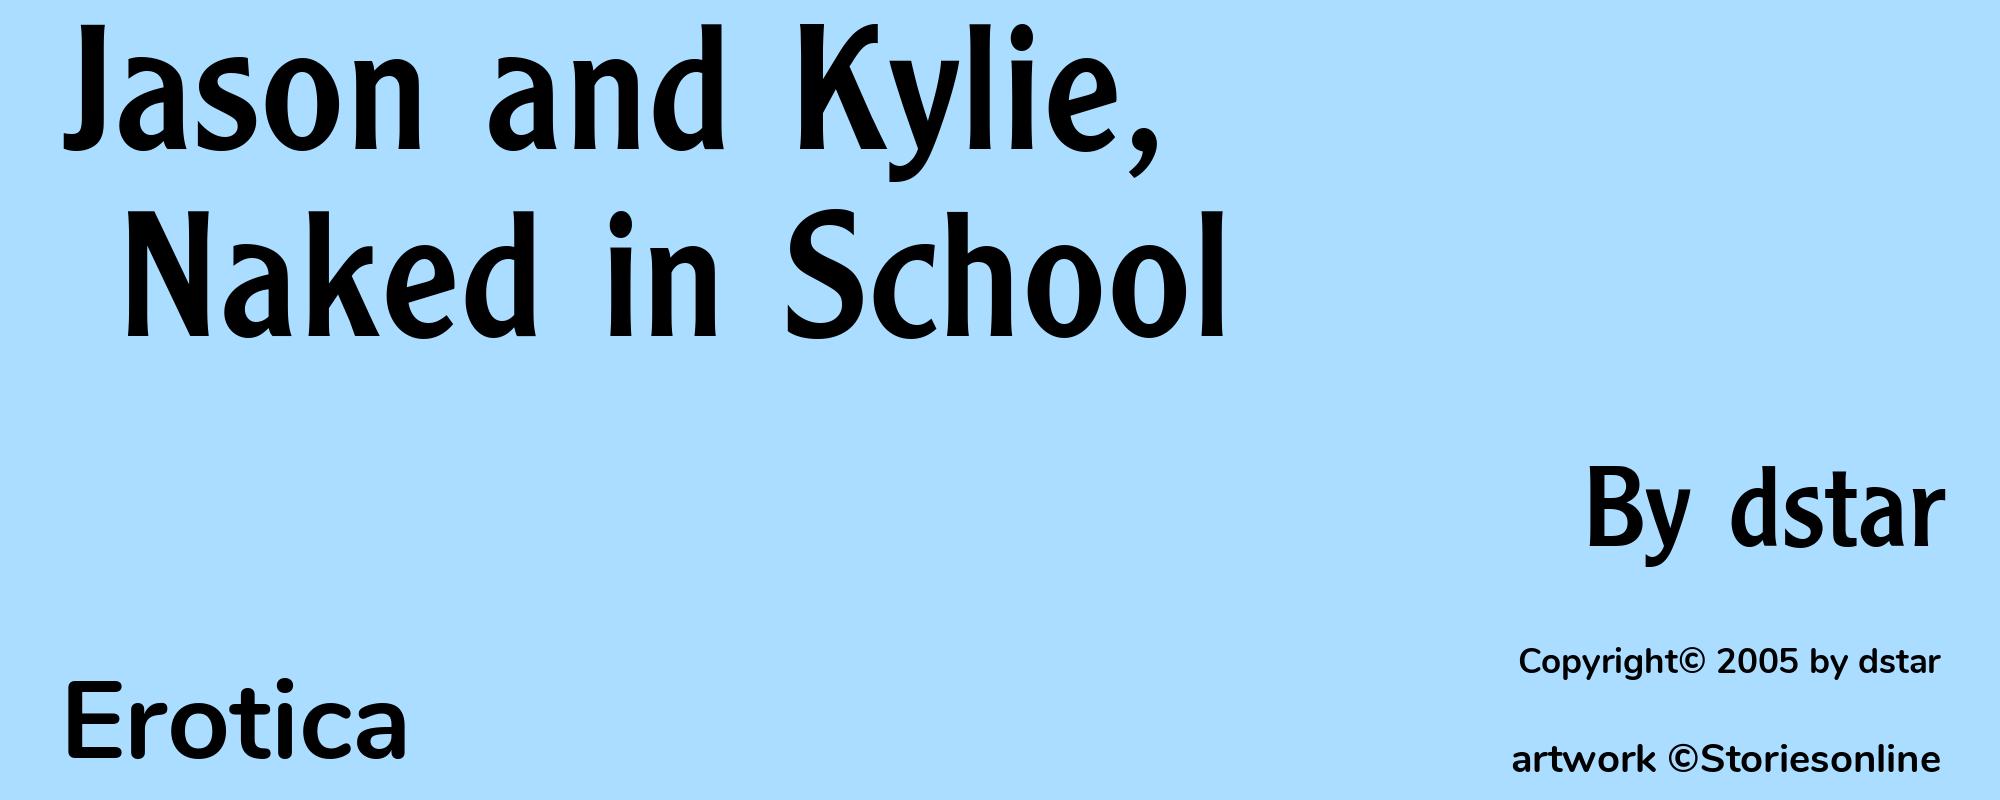 Jason and Kylie, Naked in School - Cover